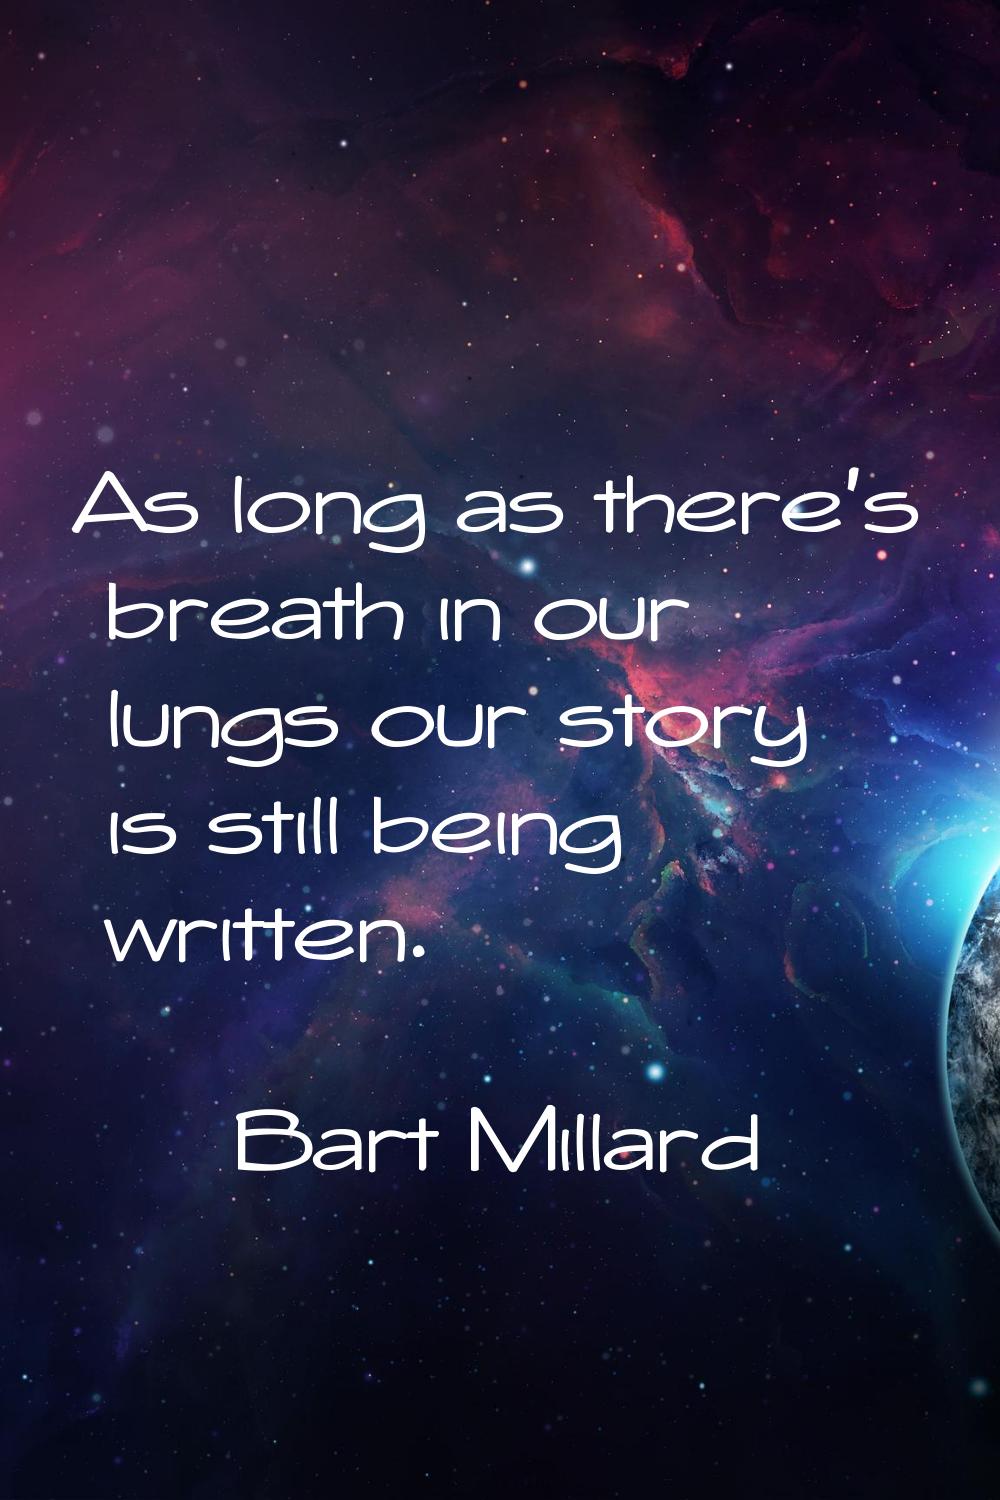 As long as there's breath in our lungs our story is still being written.